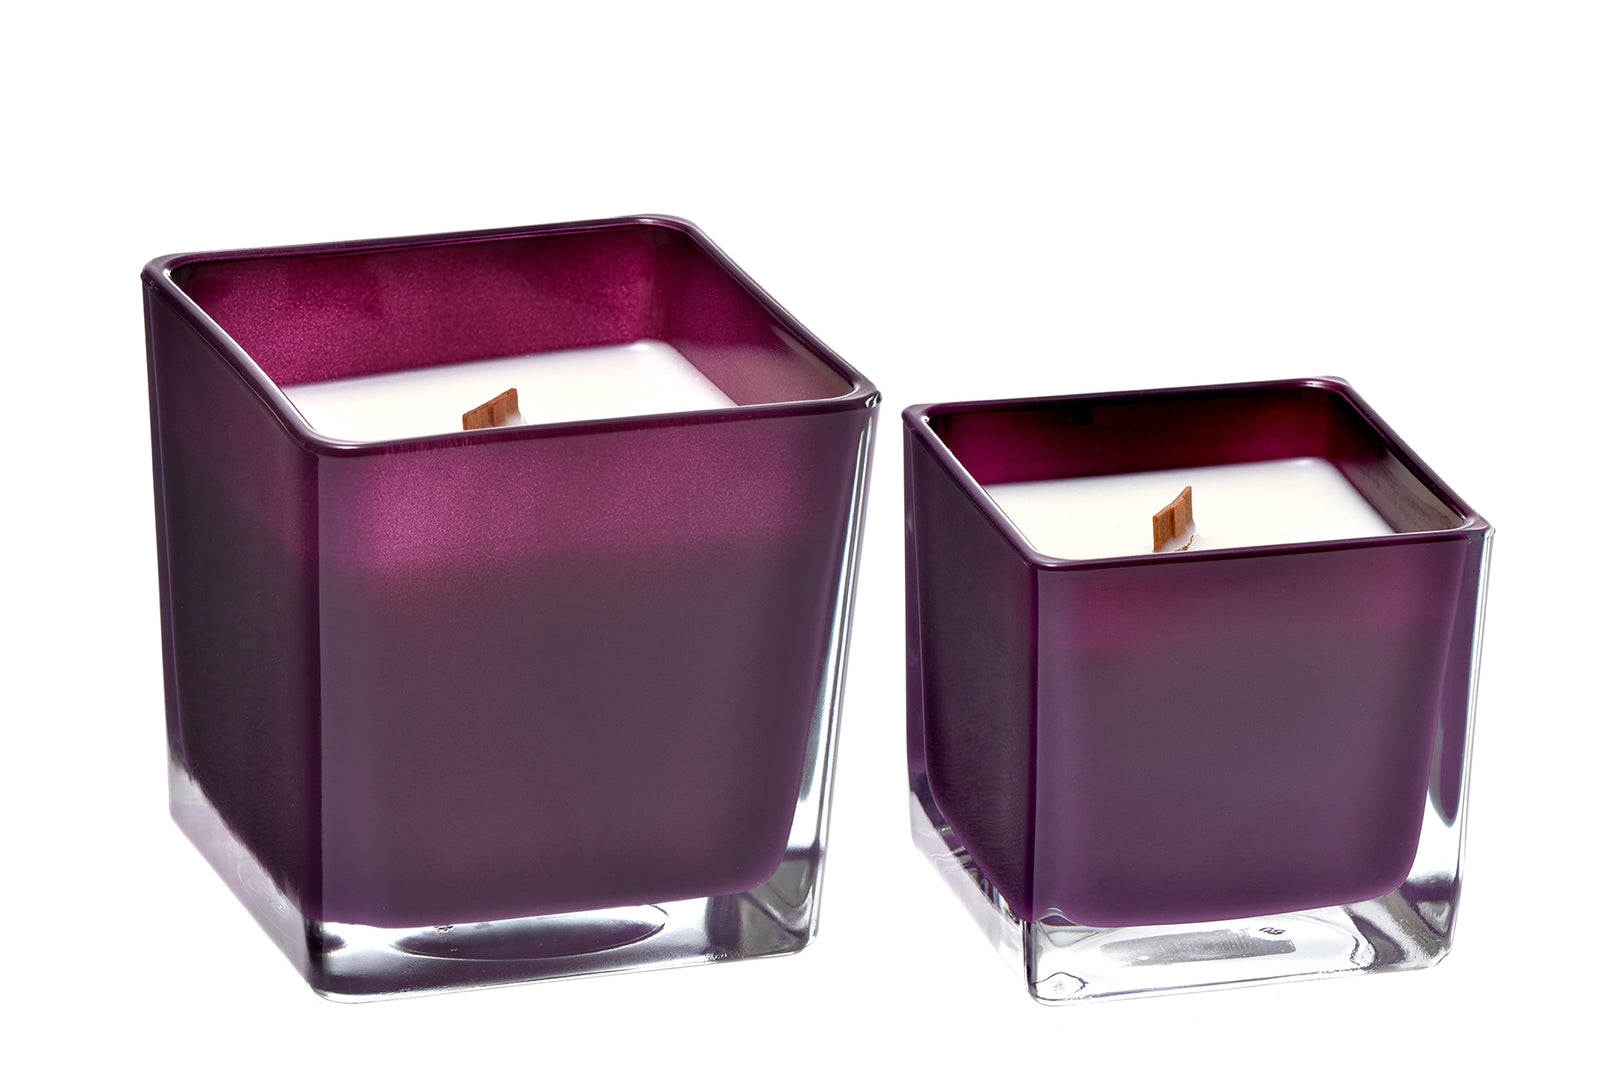 Geranium and lavender coconut wax candle in purple glass holder